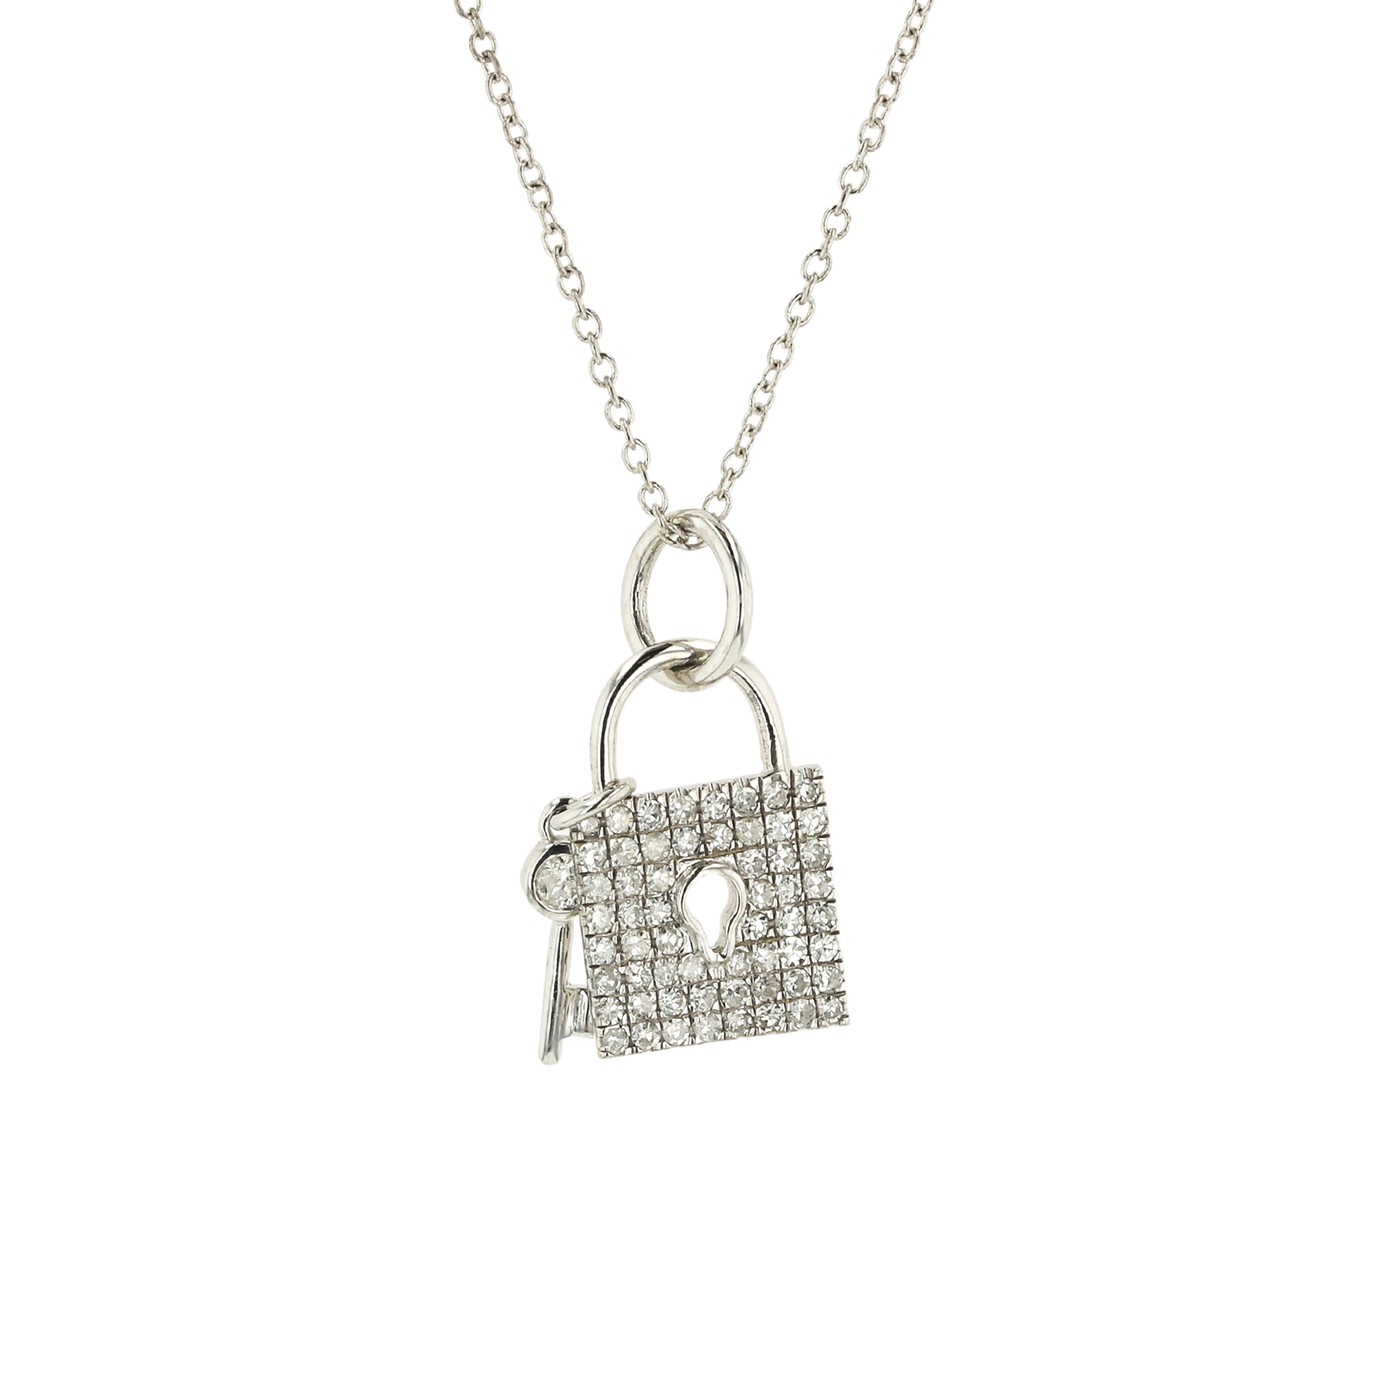 "Lock and Key Necklace" 0.30 CTTW Diamond Necklace in 14K White Gold